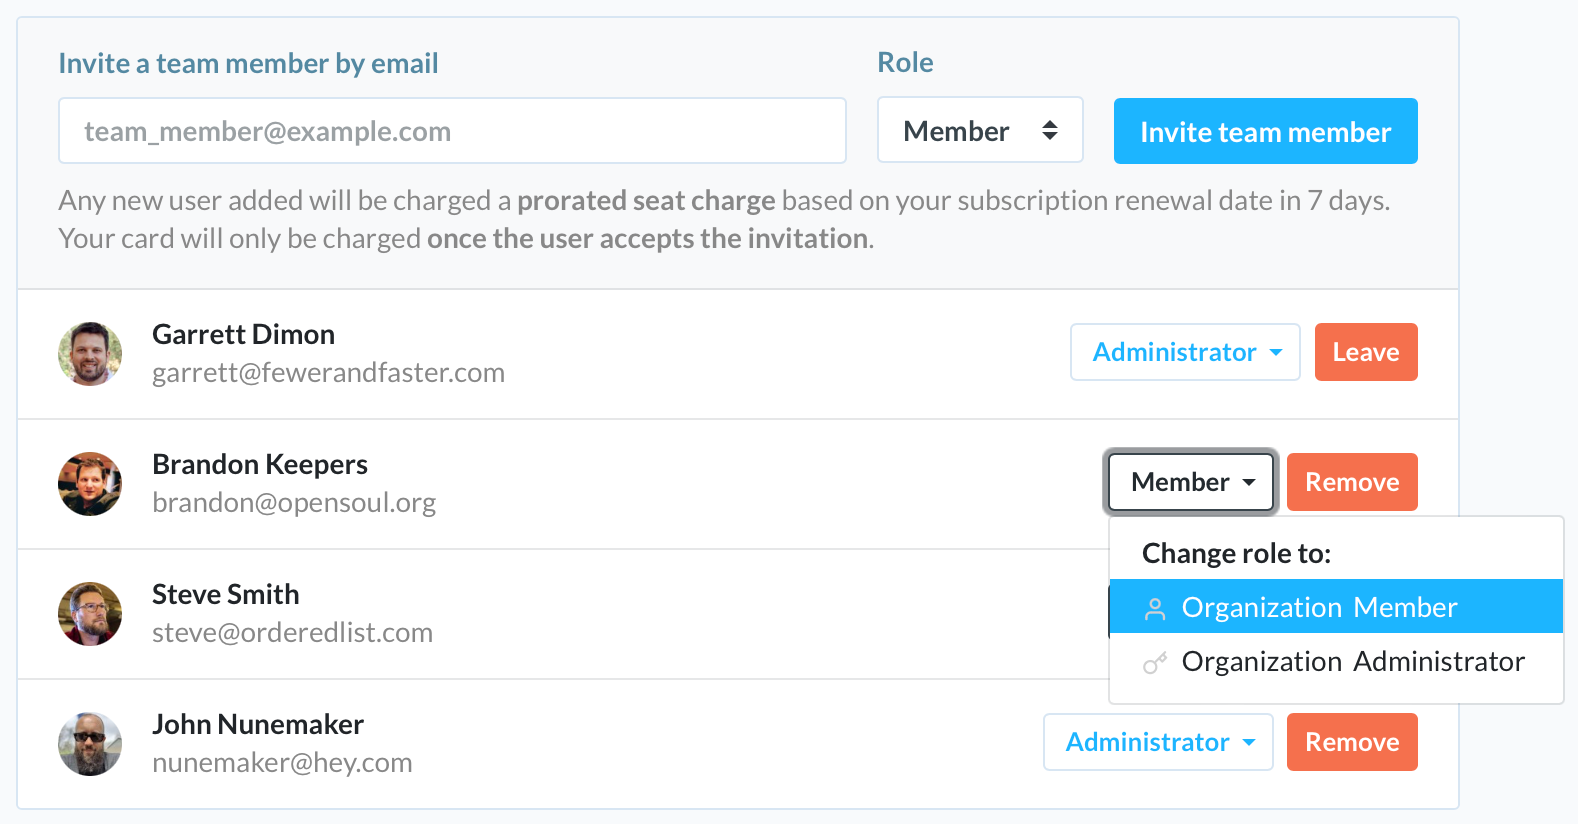 A screenshot of changing an organization's member role with options for "Organization Member" and "Organization Administrator"